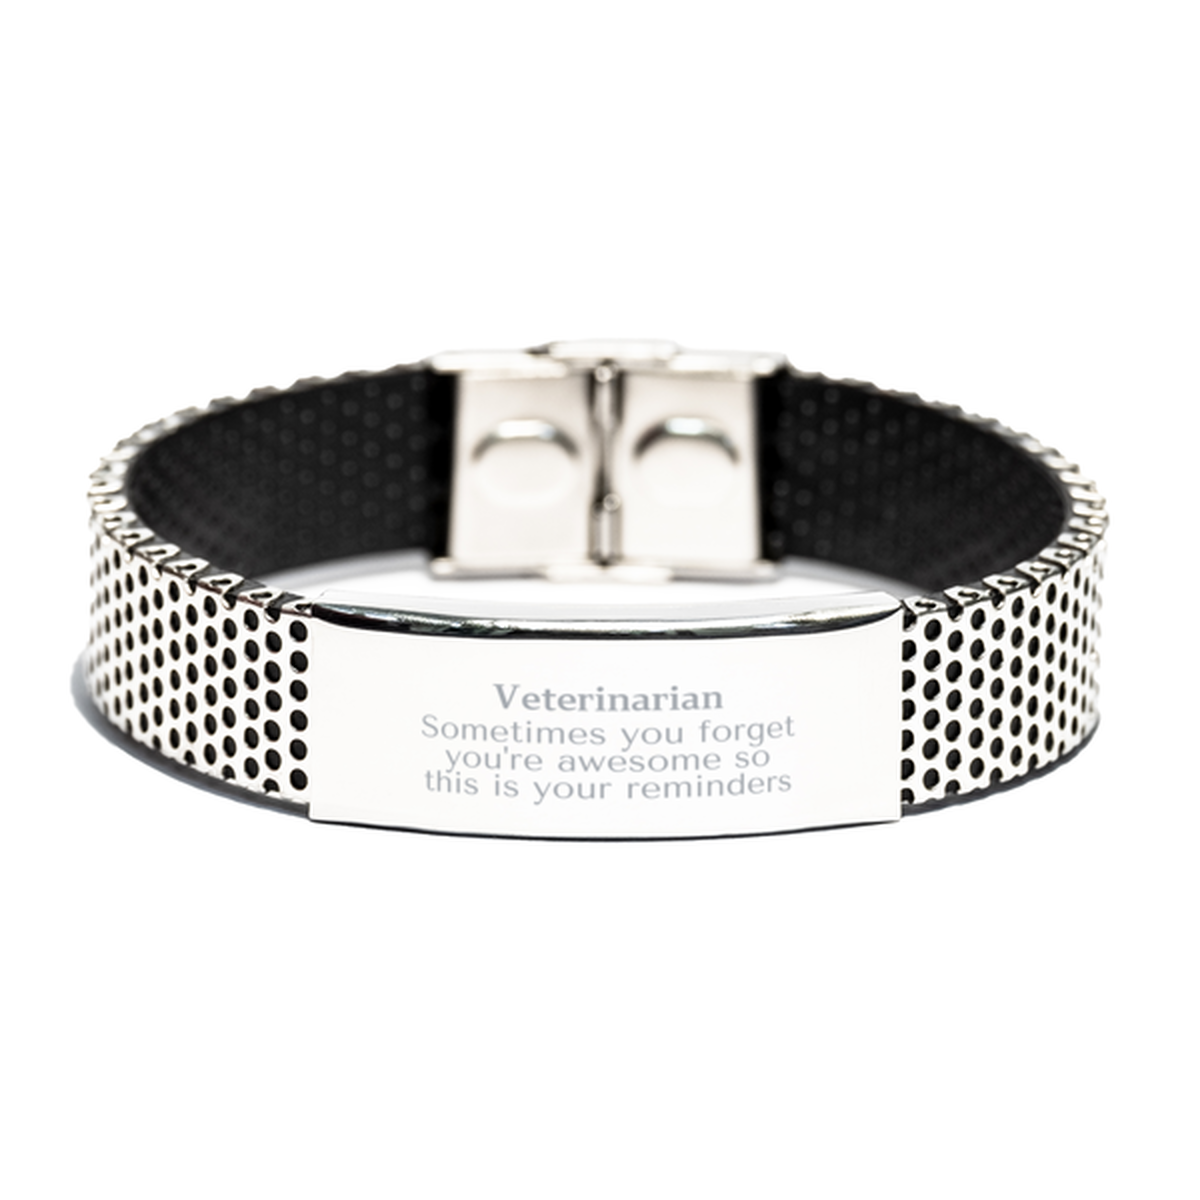 Sentimental Veterinarian Stainless Steel Bracelet, Veterinarian Sometimes you forget you're awesome so this is your reminders, Graduation Christmas Birthday Gifts for Veterinarian, Men, Women, Coworkers